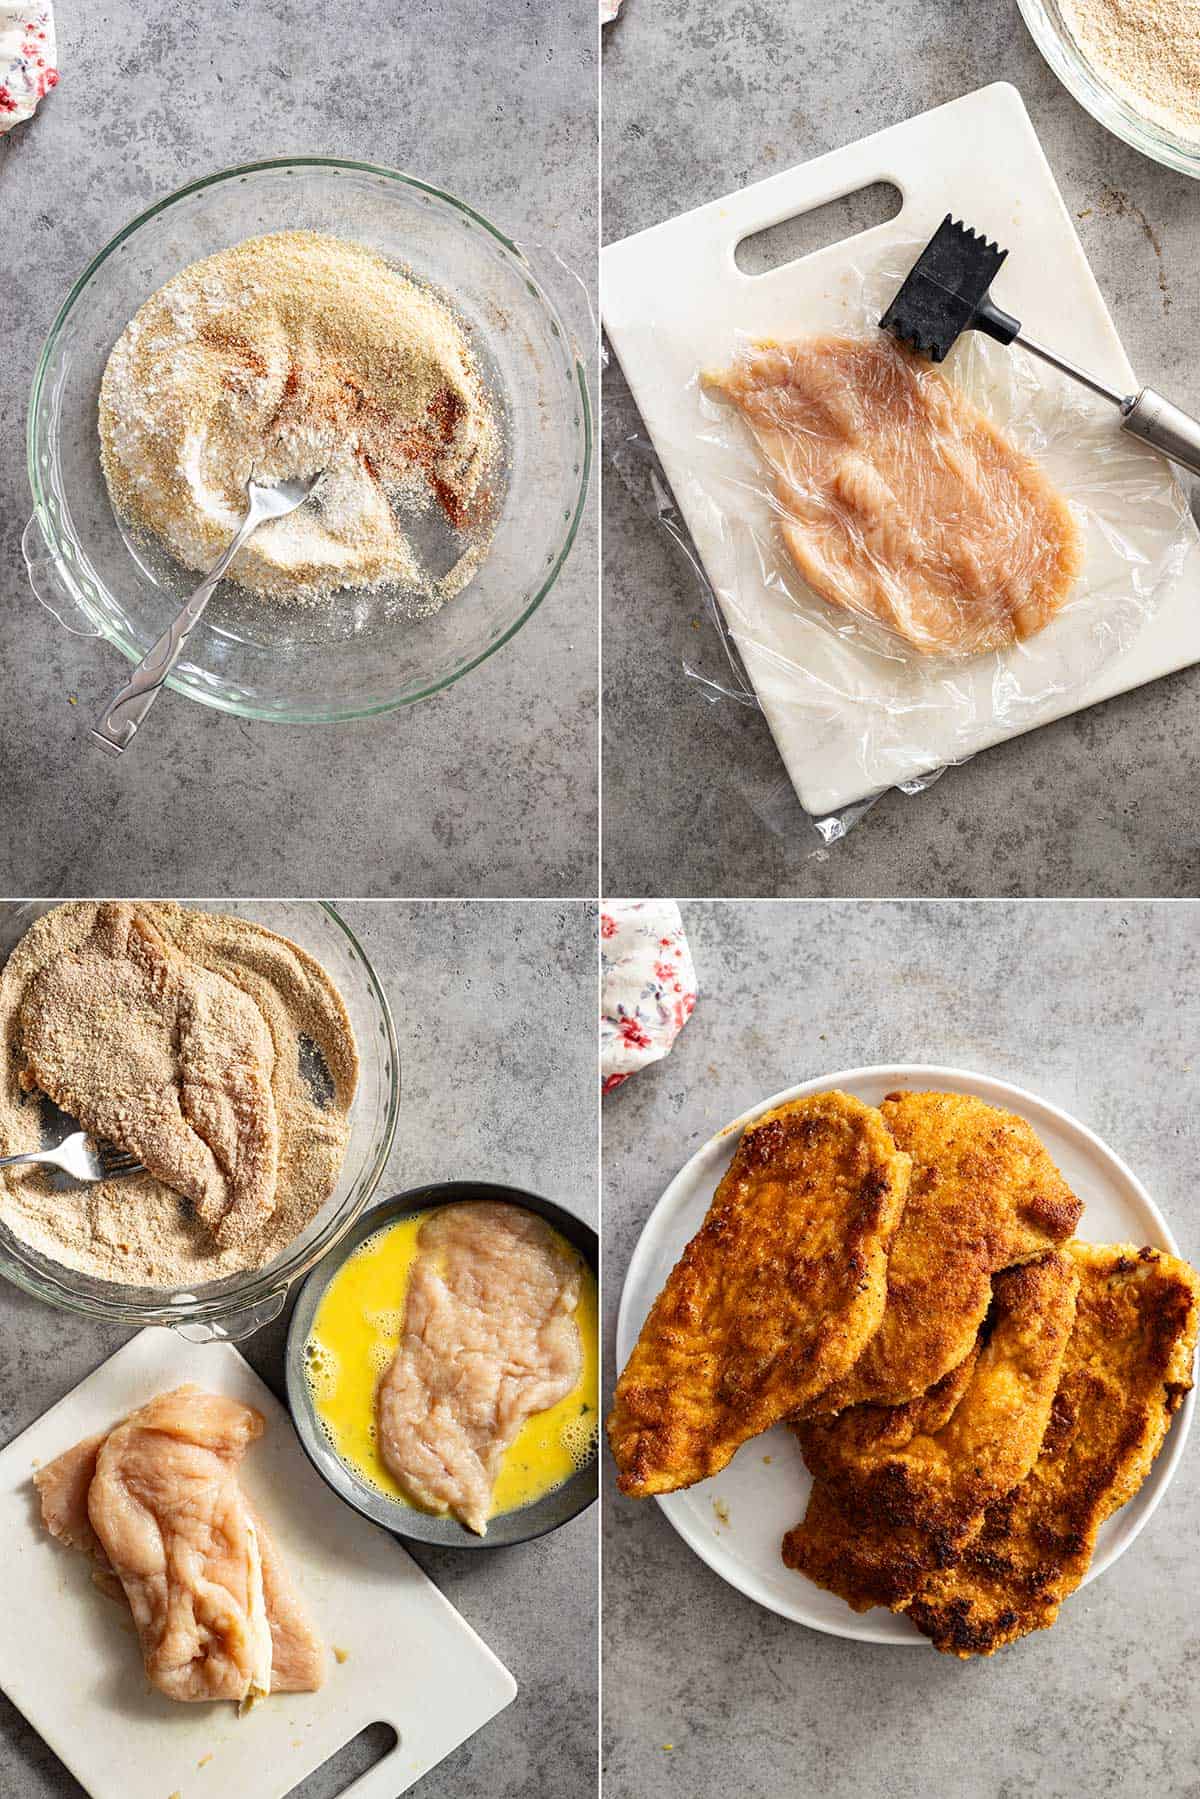 Four process photos: Mixing the flour coating, pounding the chicken, coating the chicken, and cooked chicken.